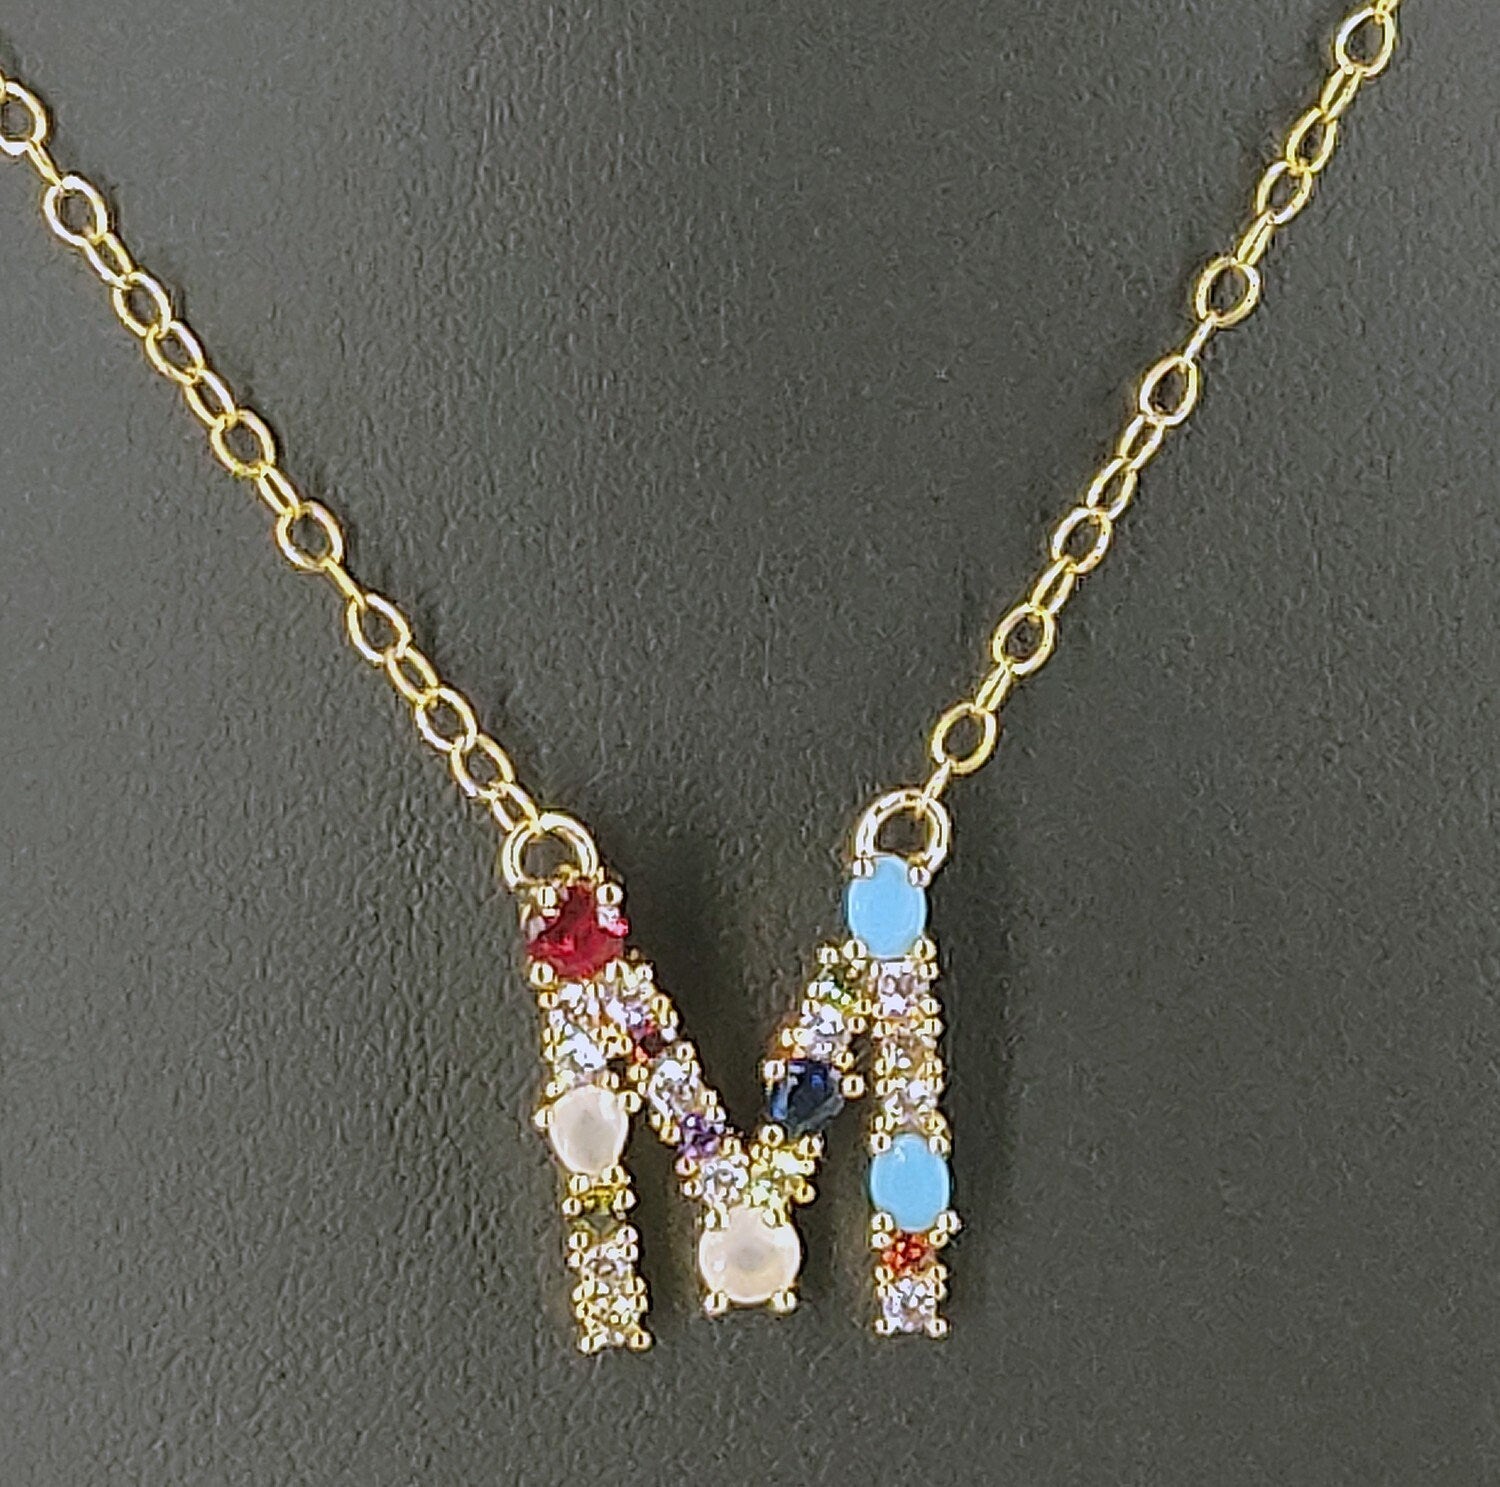 Rainbow Initial Necklace, Gold Filled Dainty Alphabet Necklace, Multi Colored CZ Crystals Turquoise Blue for Teens